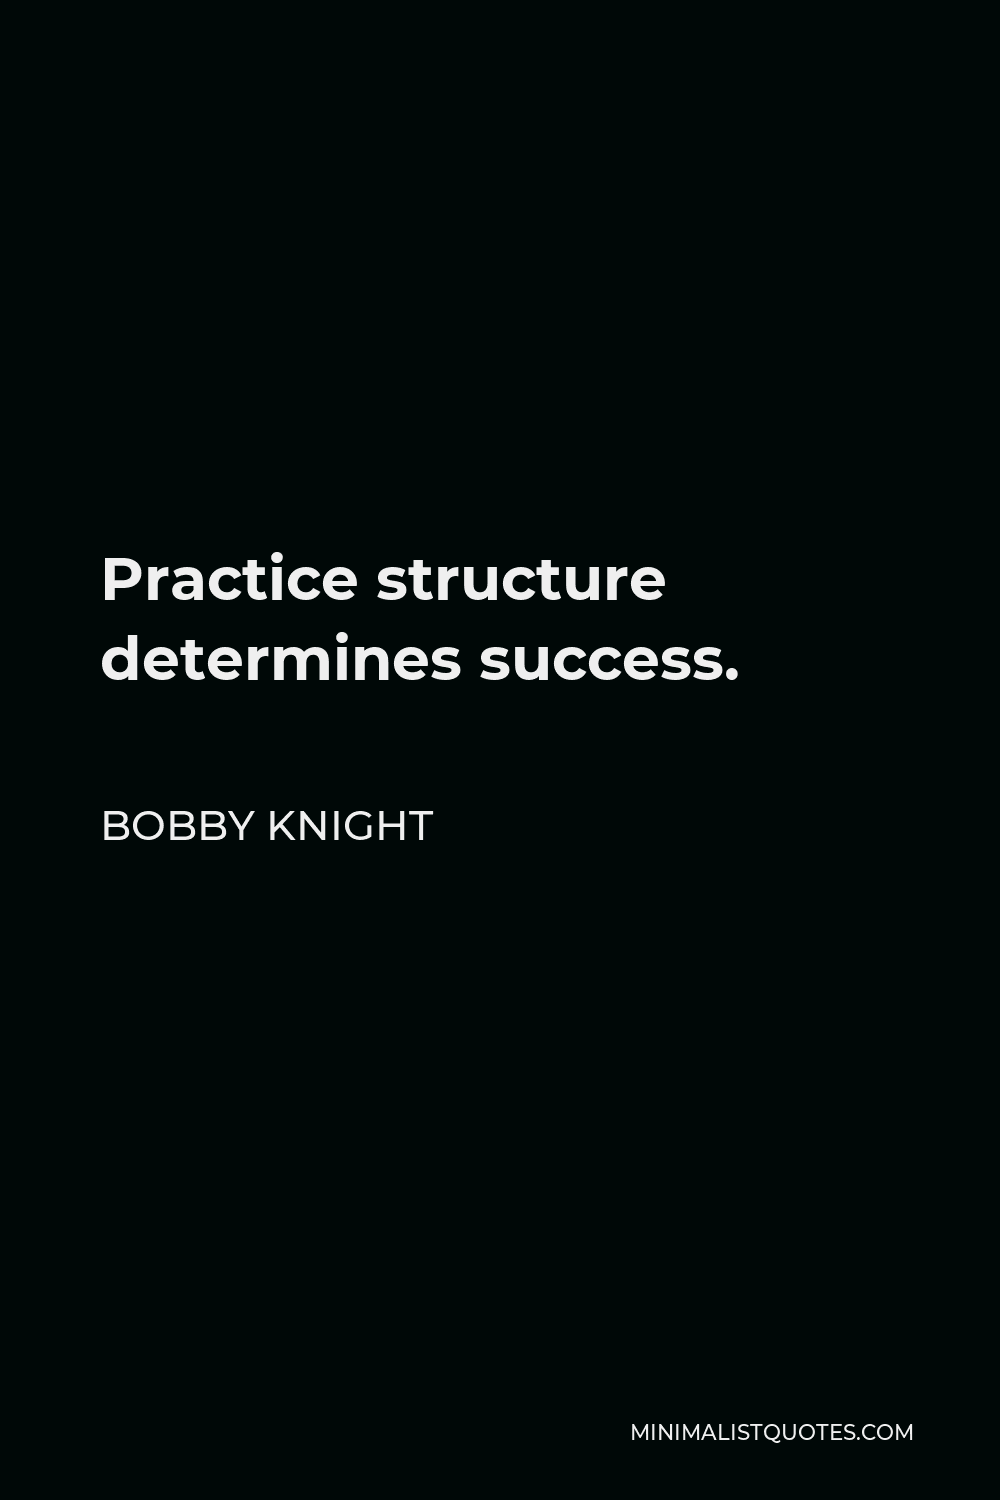 Bobby Knight Quote - Practice structure determines success.